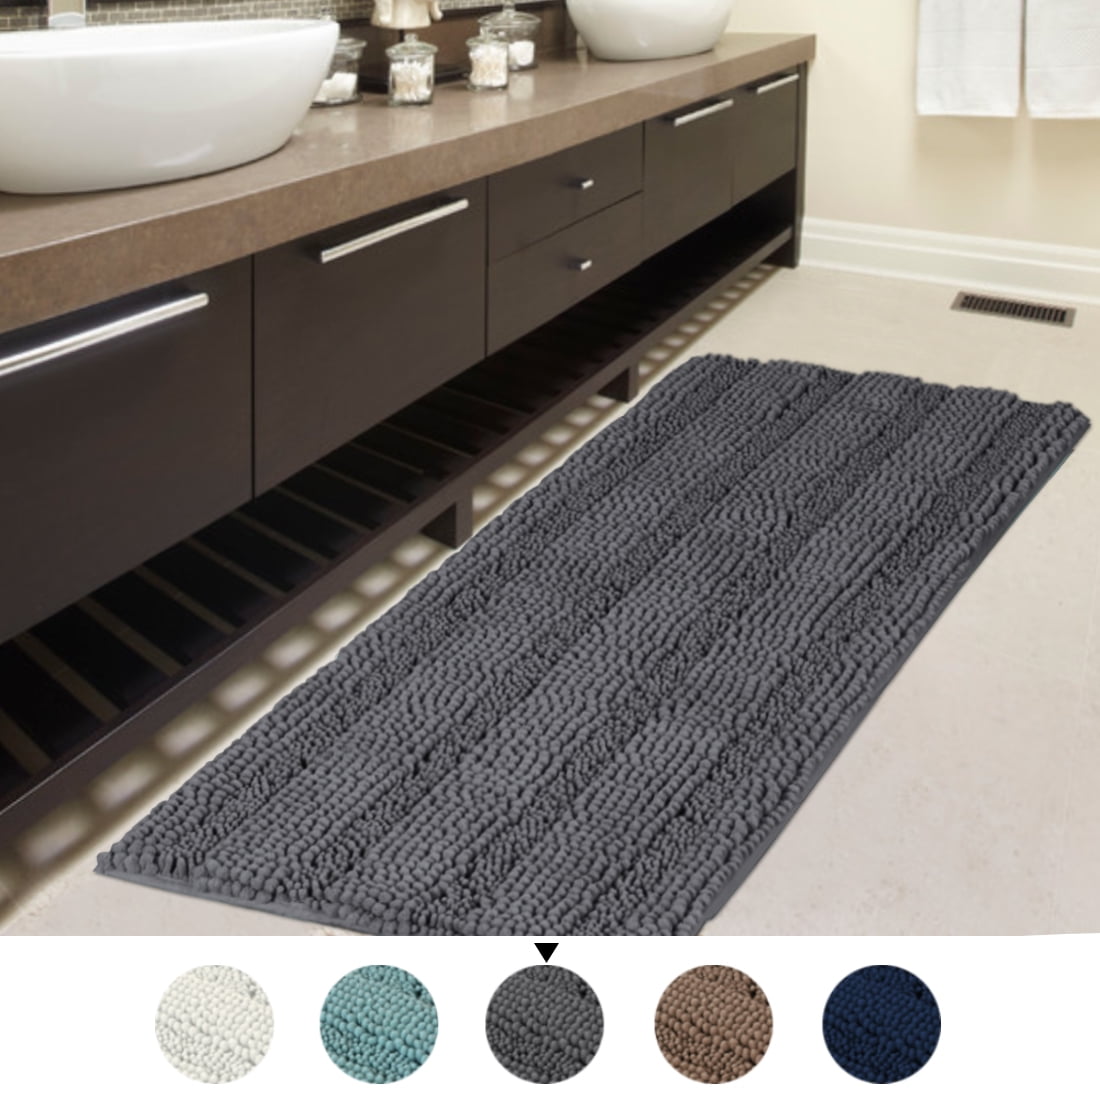 Black/ Grey 2 Piece Toilet Cover Set Rug Mat Bathroom With Rubber Back Anti Slip 